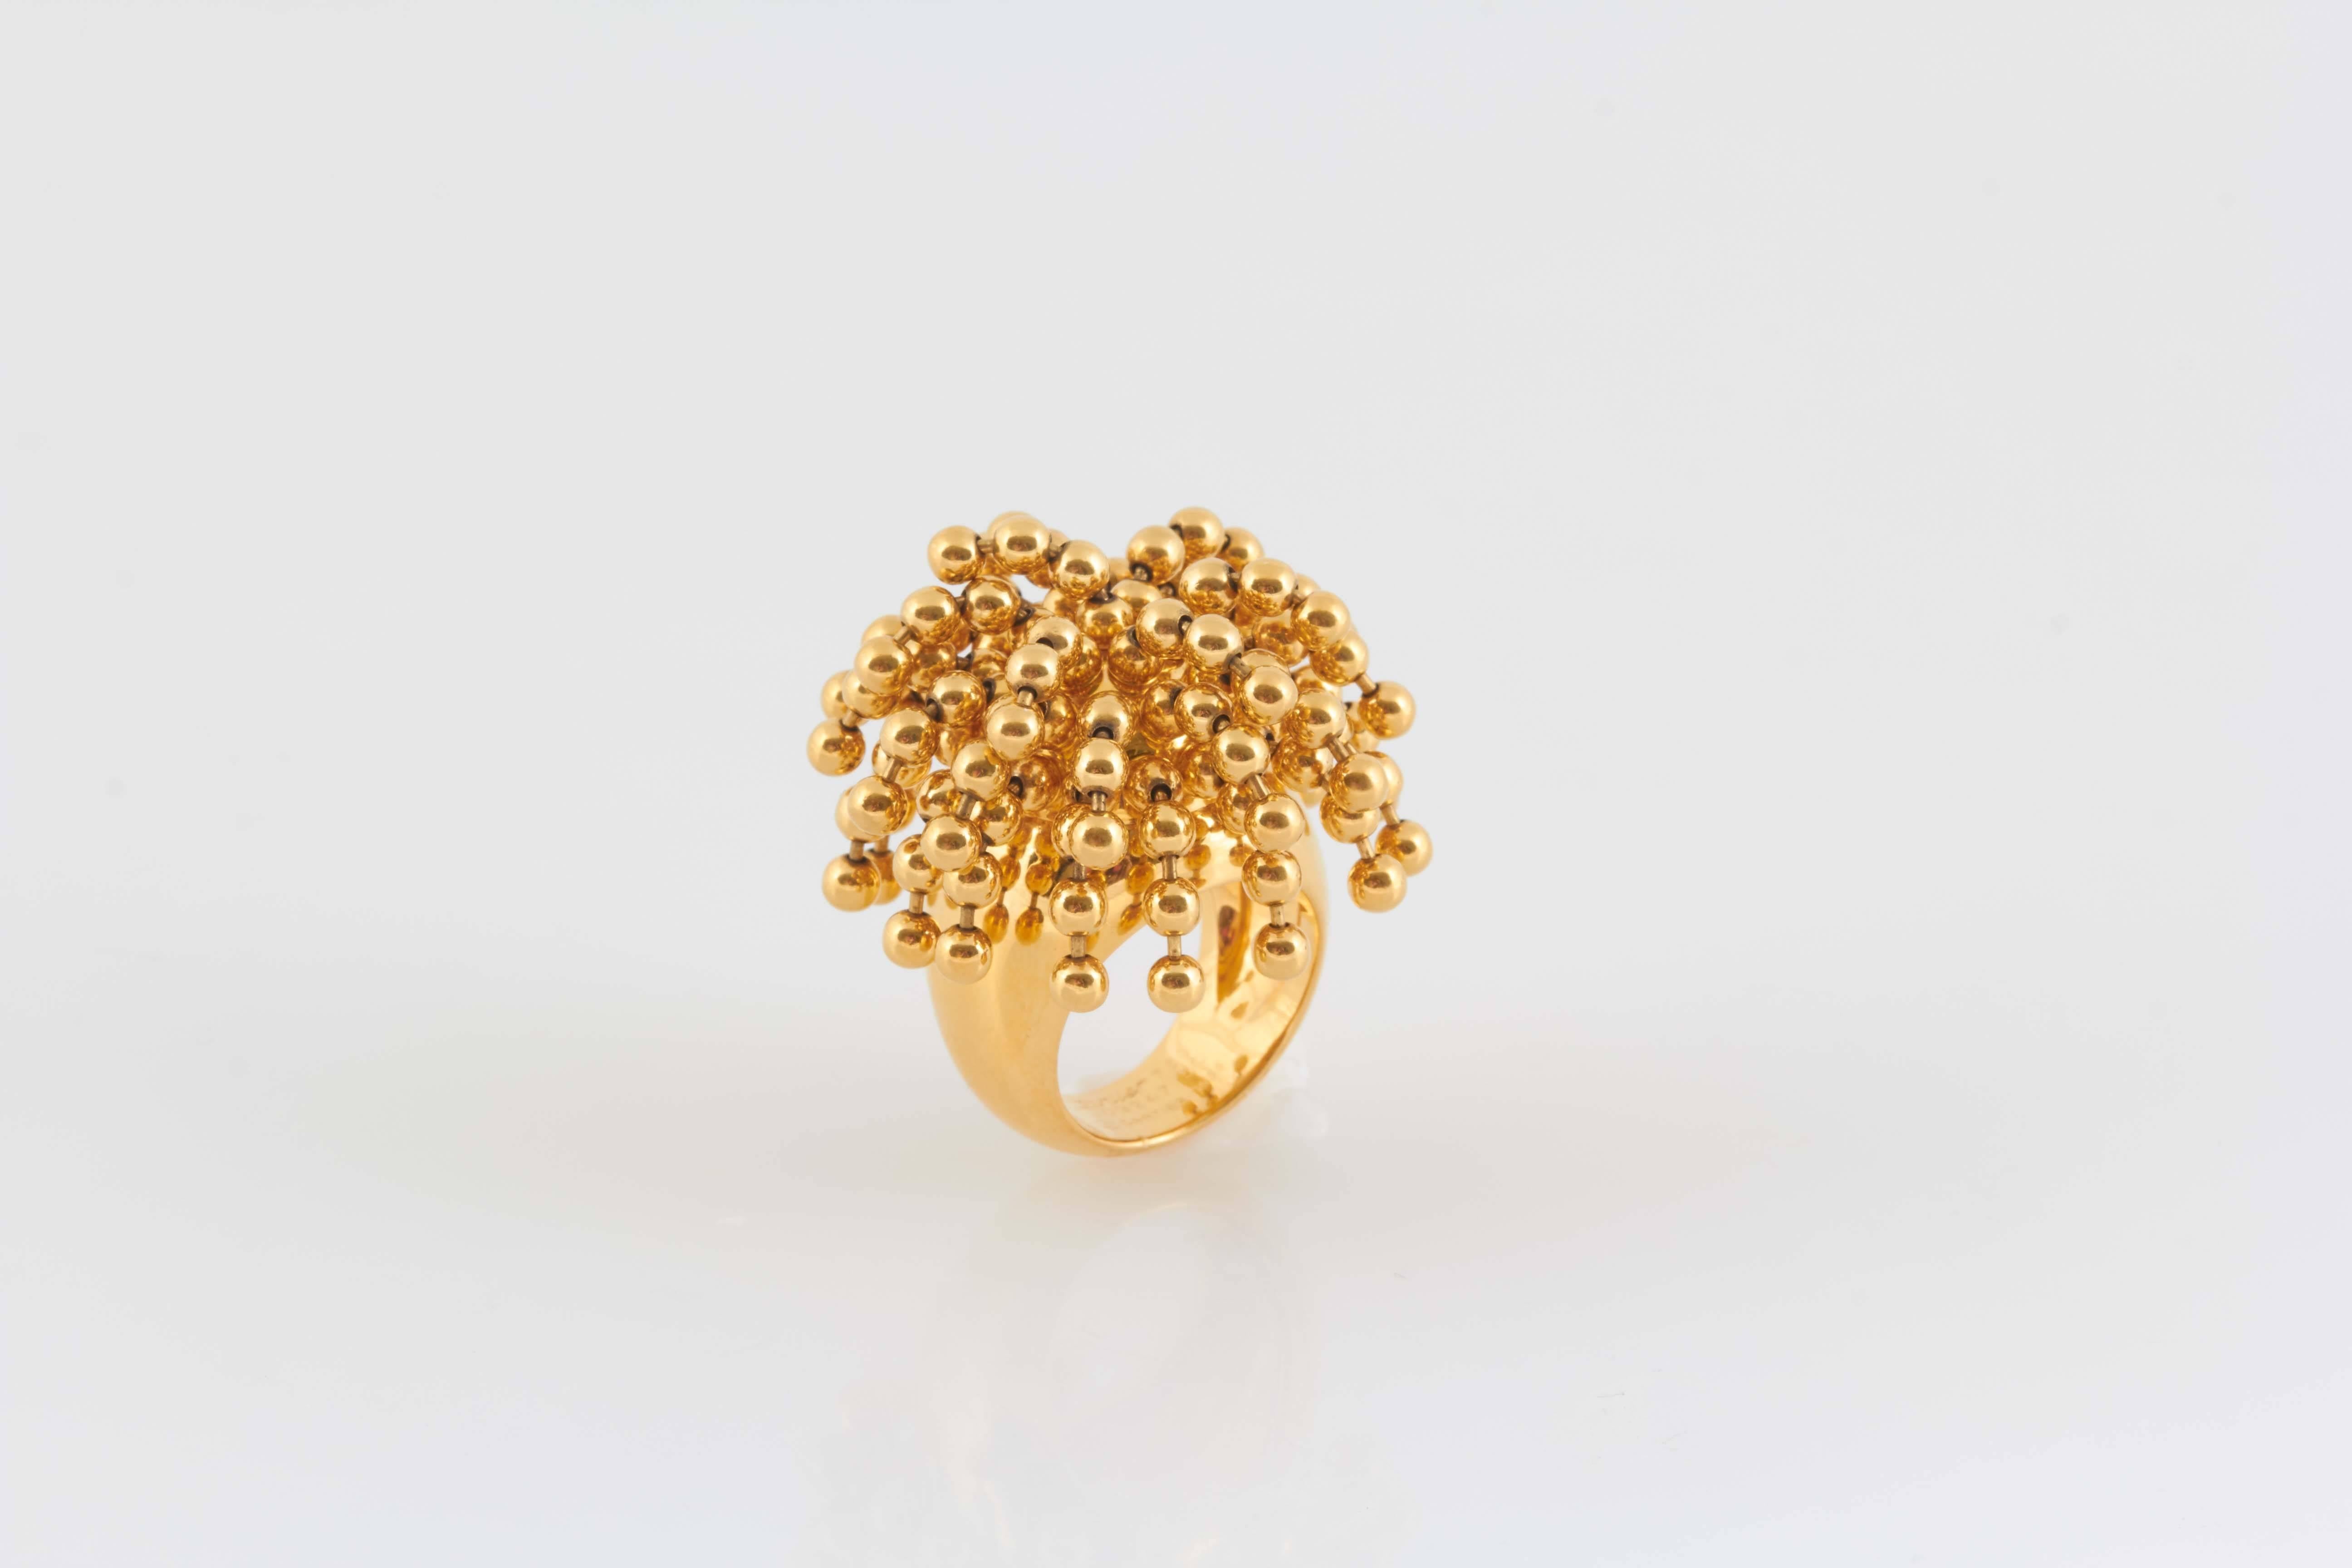 Nouvelle Vague Perruque Ring finely crafted in 18k yellow gold.  Having good weight and lots of Movement a very unusual and very fun ring. Signed by CARTIER. Number #J03247 50. Circa 1999.
